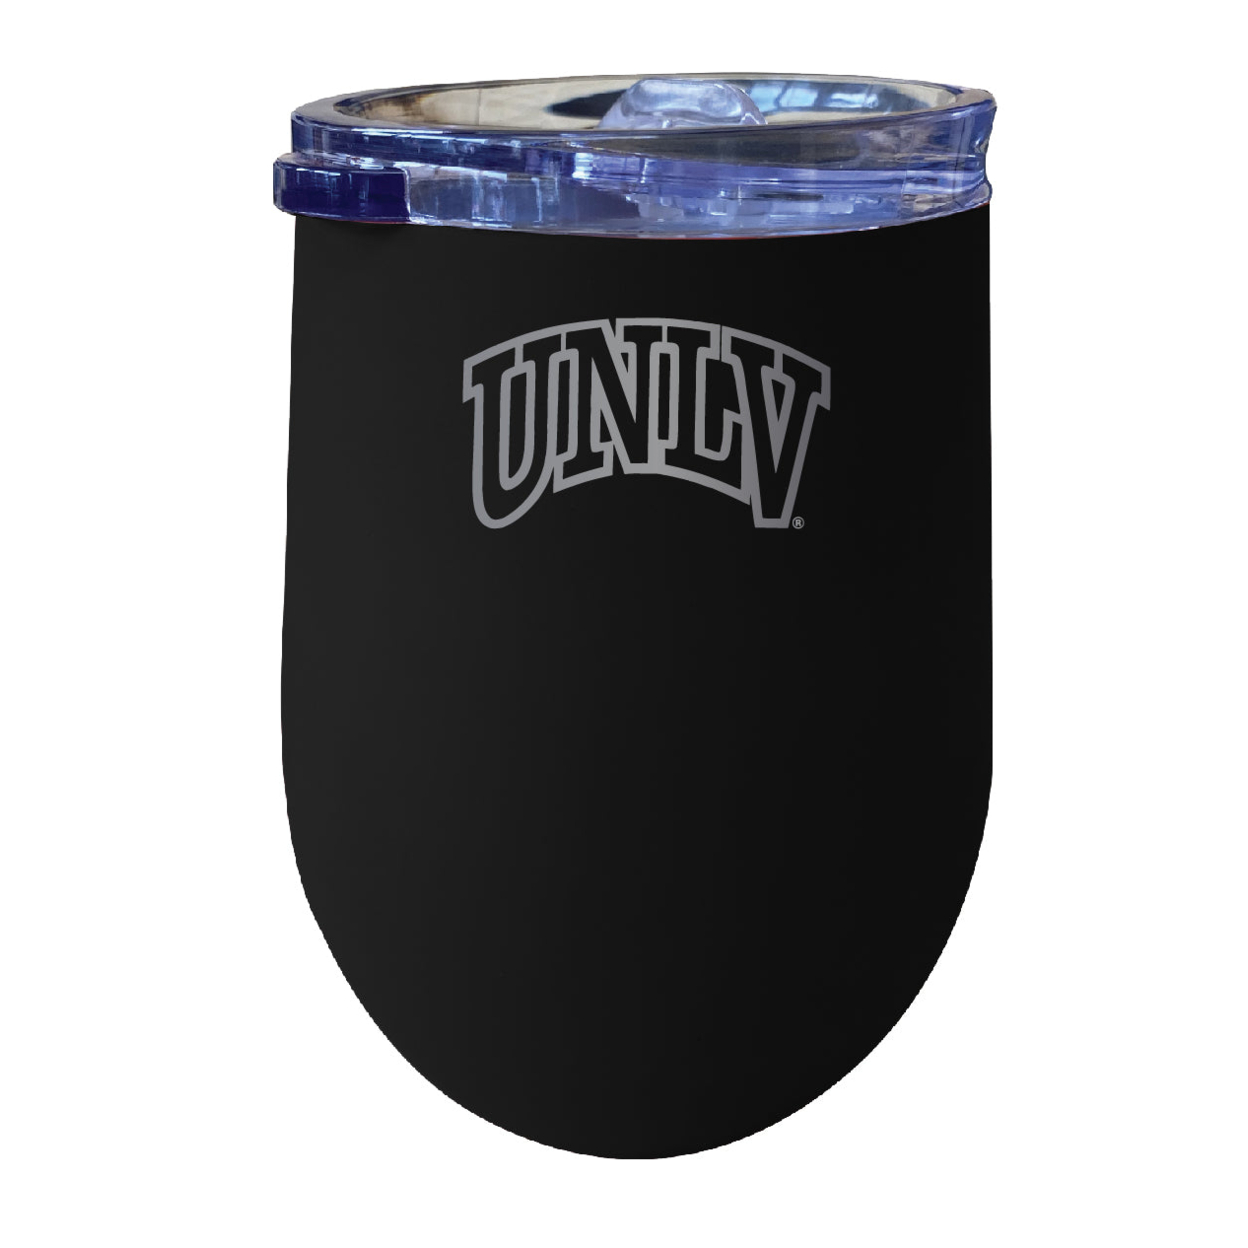 UNLV Rebels 12 Oz Etched Insulated Wine Stainless Steel Tumbler - Choose Your Color - Black